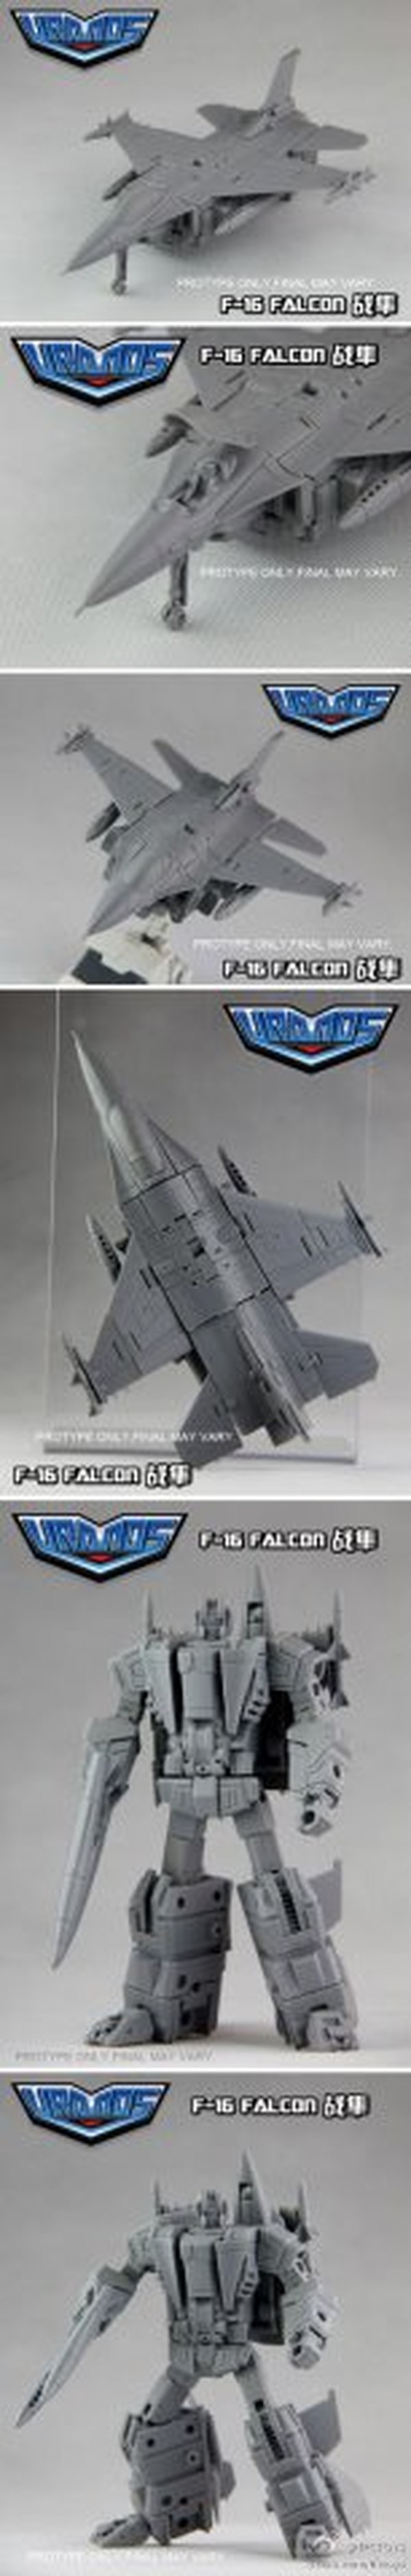 TFC Toys Uranos New Images Show Full Color Combiner and F-16 Falcon